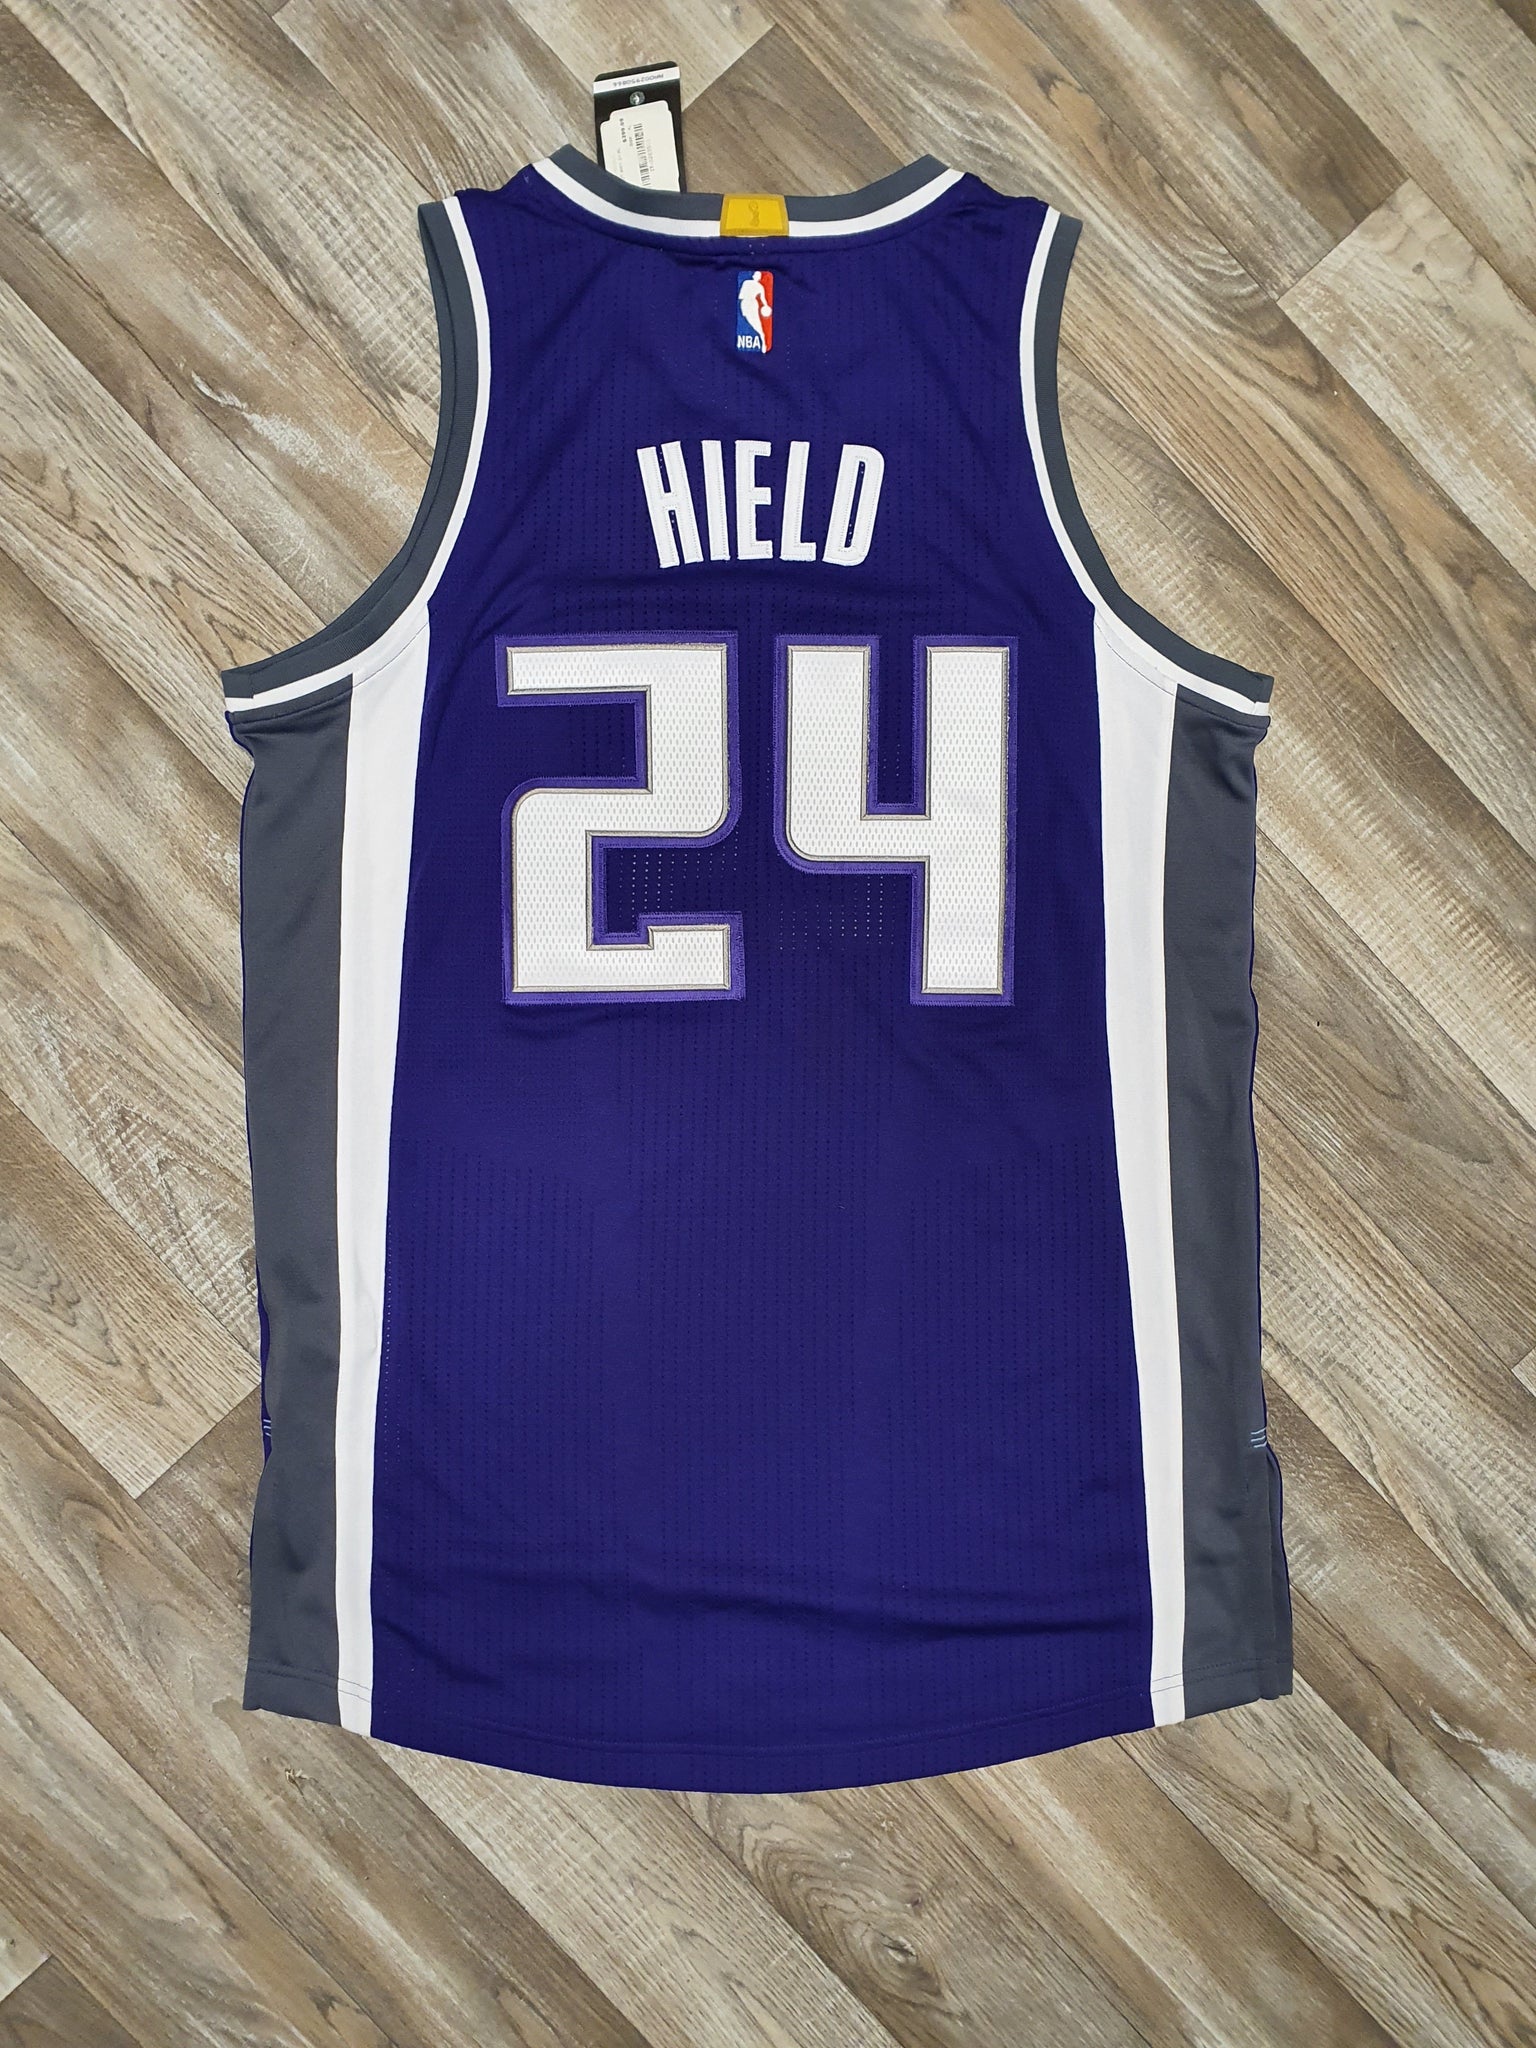 🏀 Buddy Hield Sacramento Kings Jersey Size XL – The Throwback Store 🏀